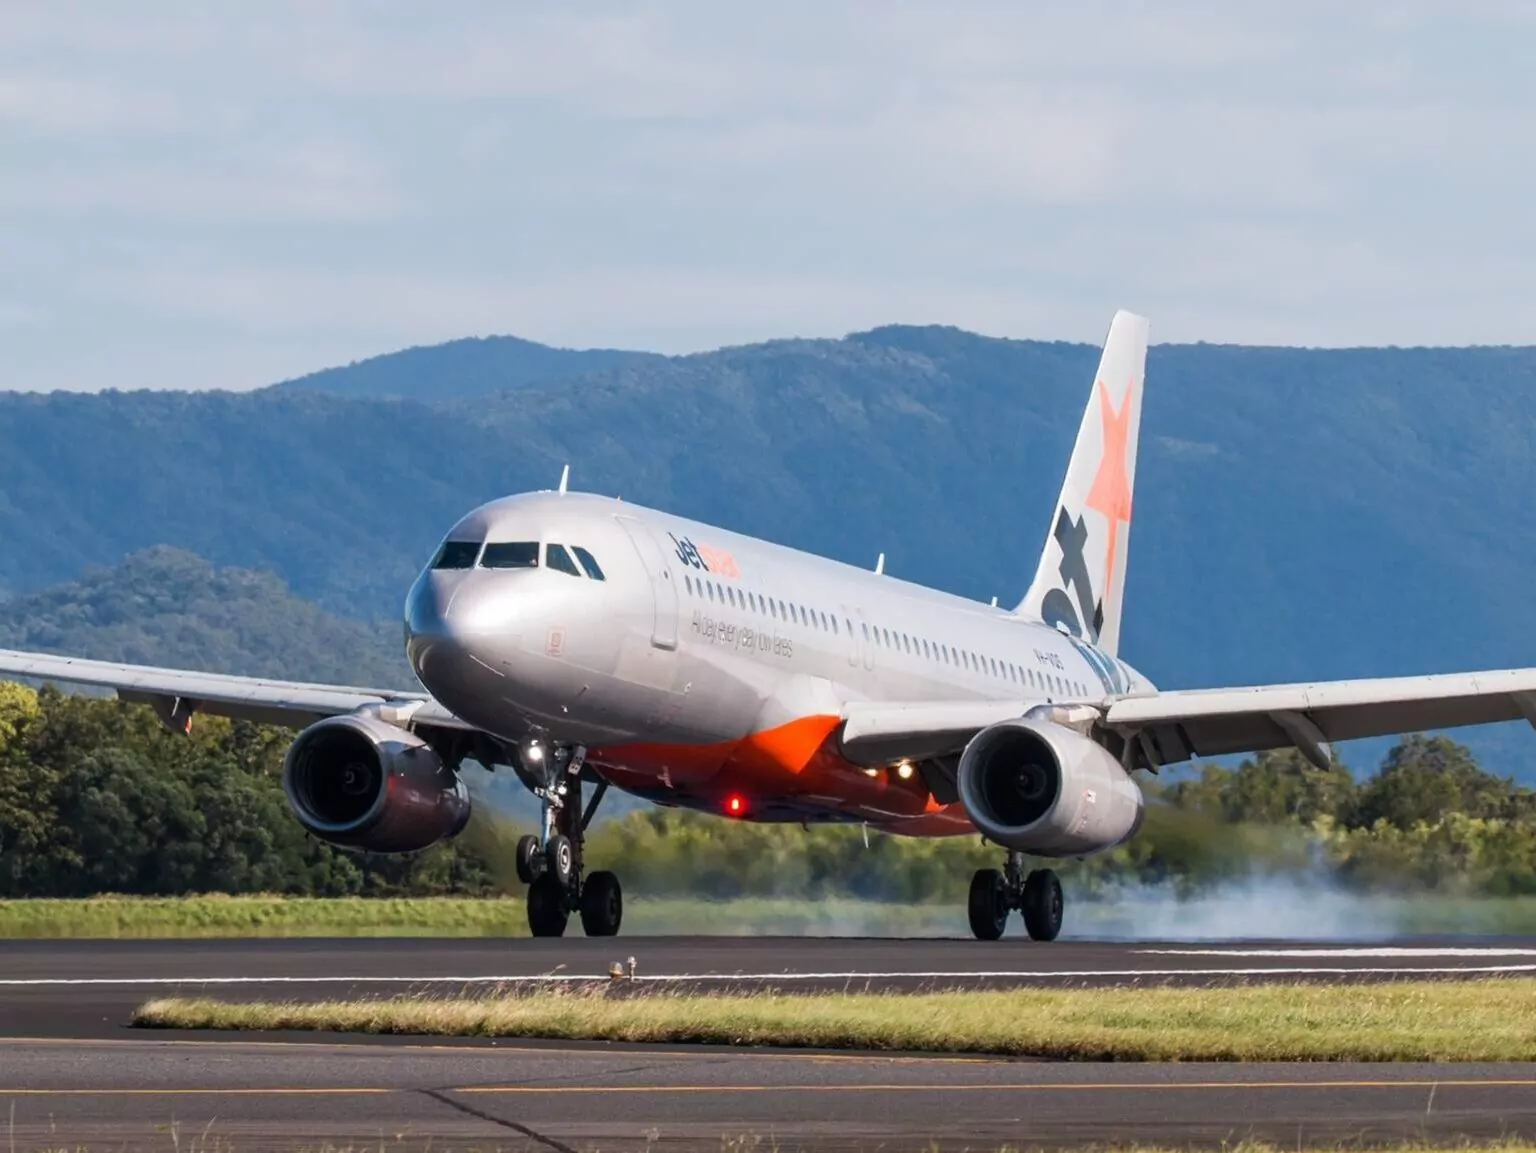 Jetstar significantly boosts Christchurch operations with more flights and aircraft capacity